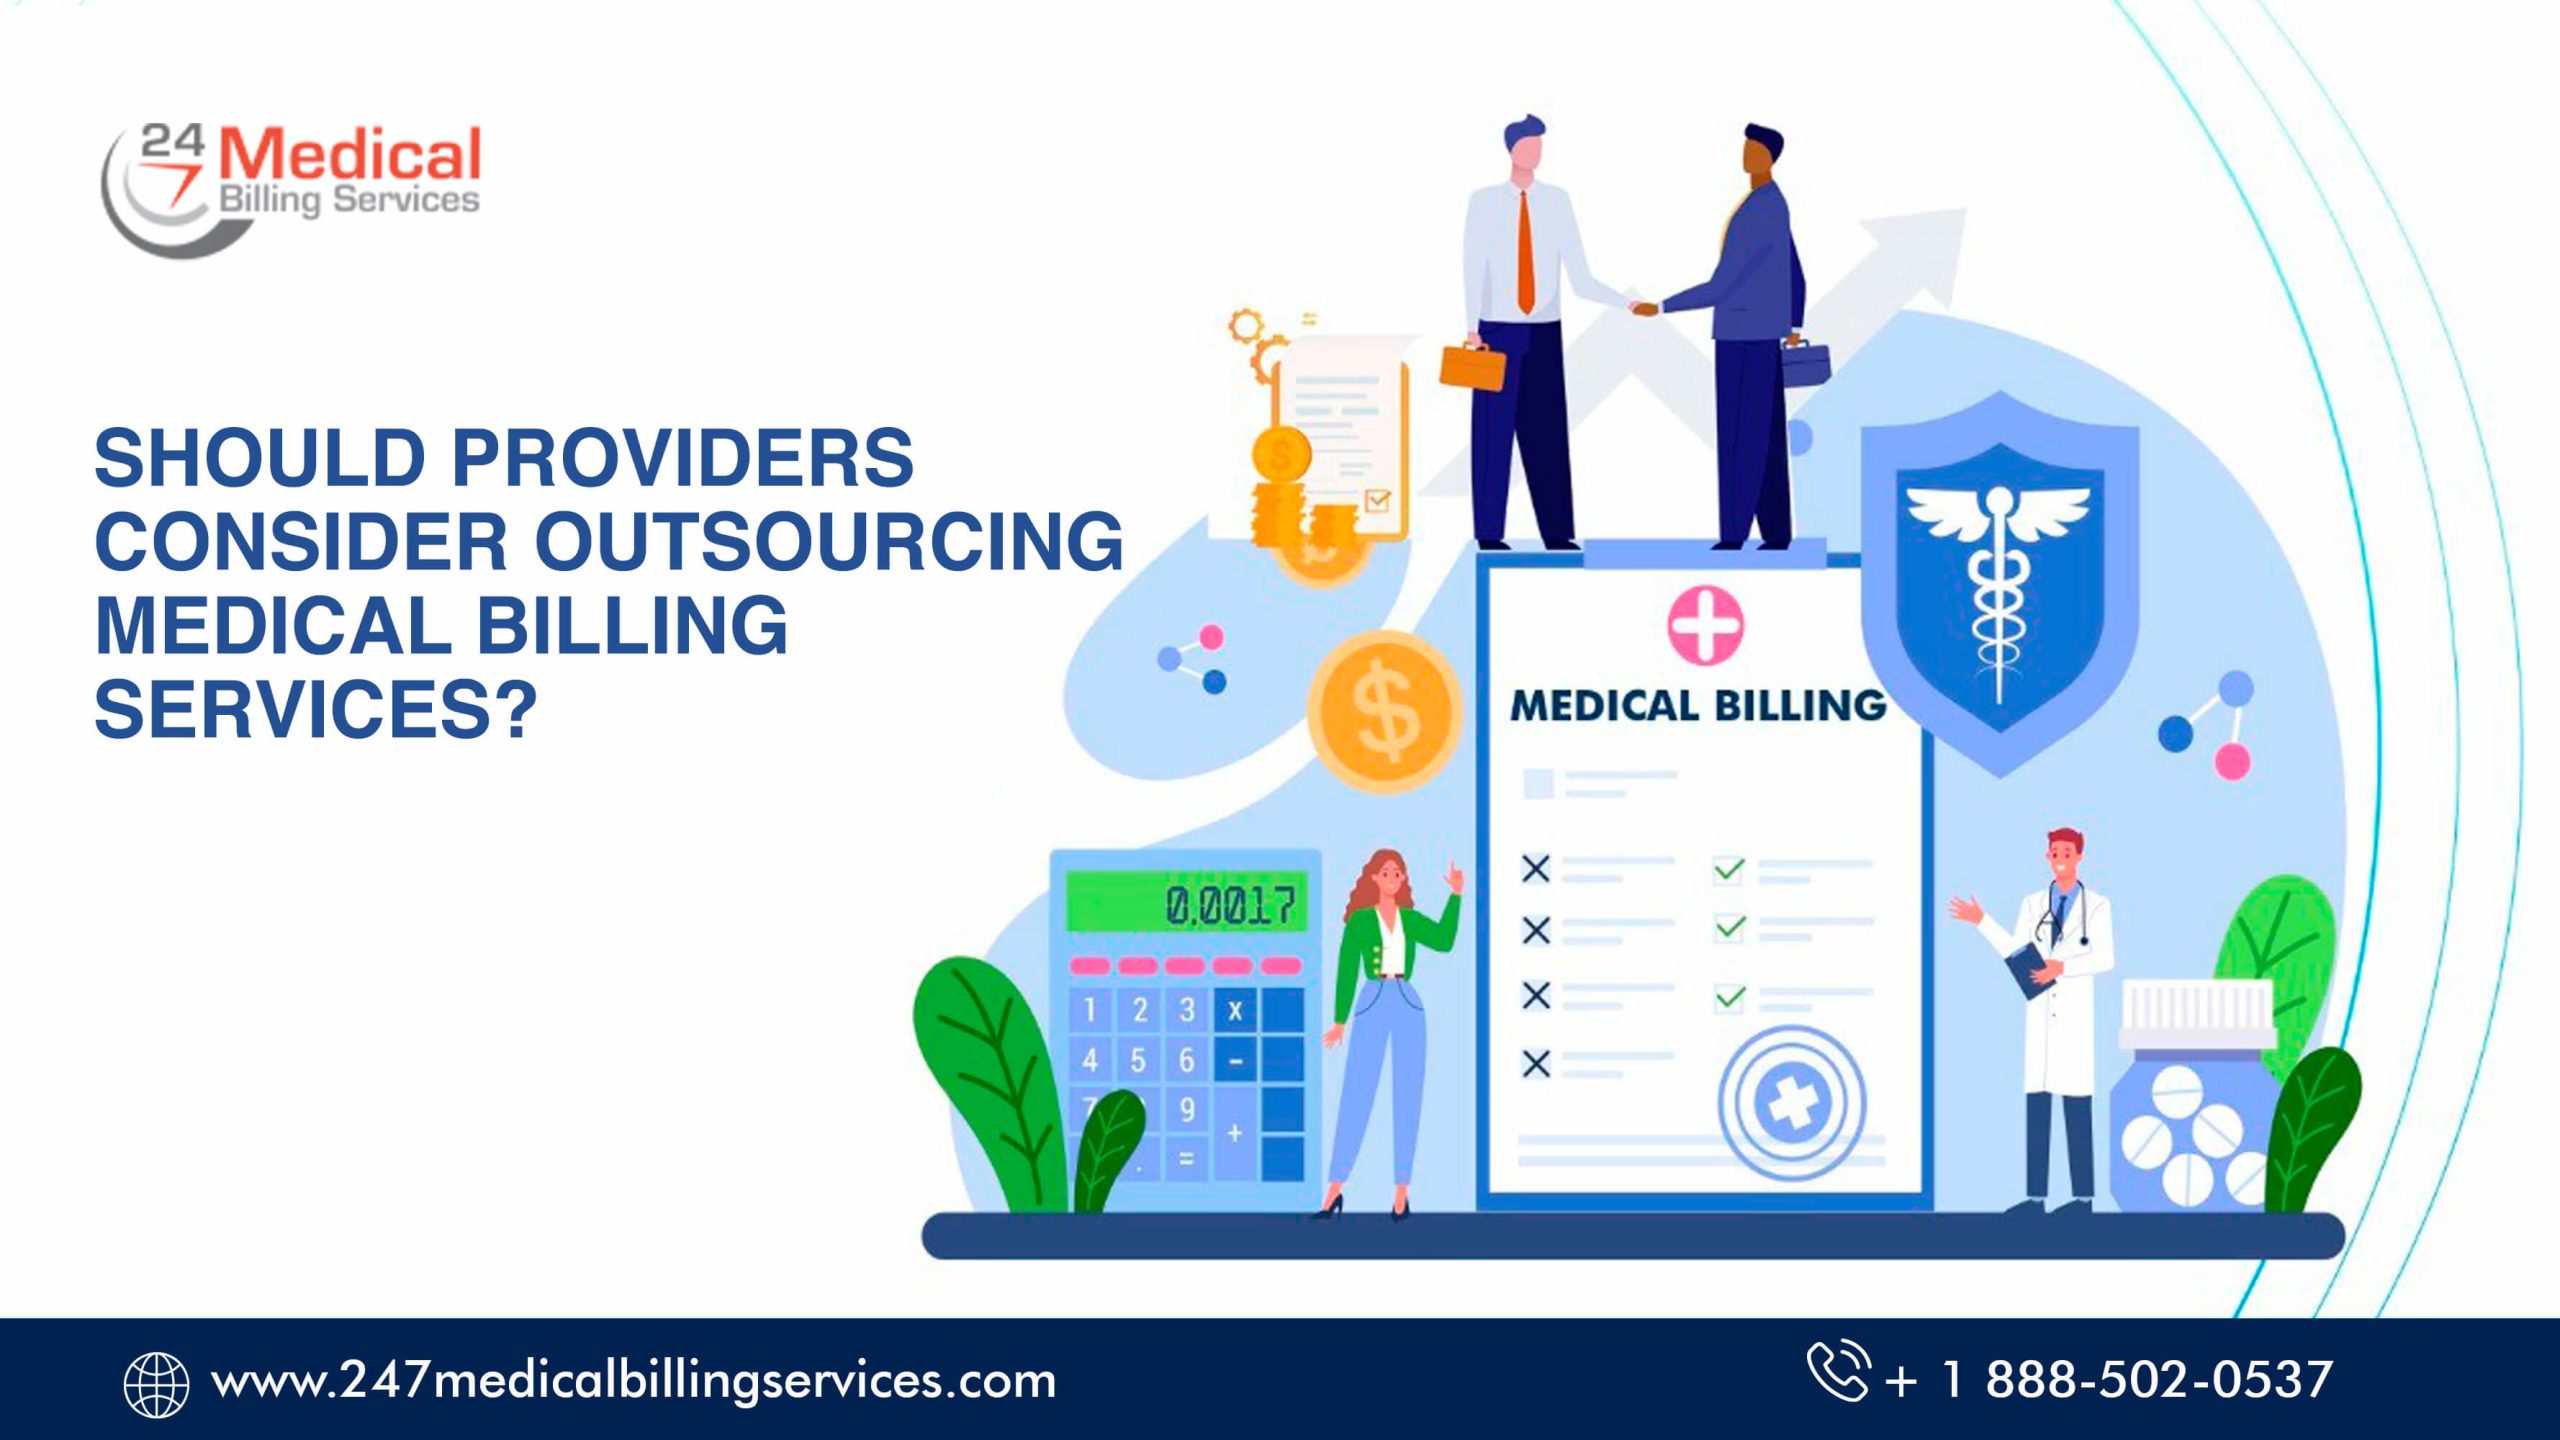  Should Providers Consider Outsourcing Medical Billing Services?